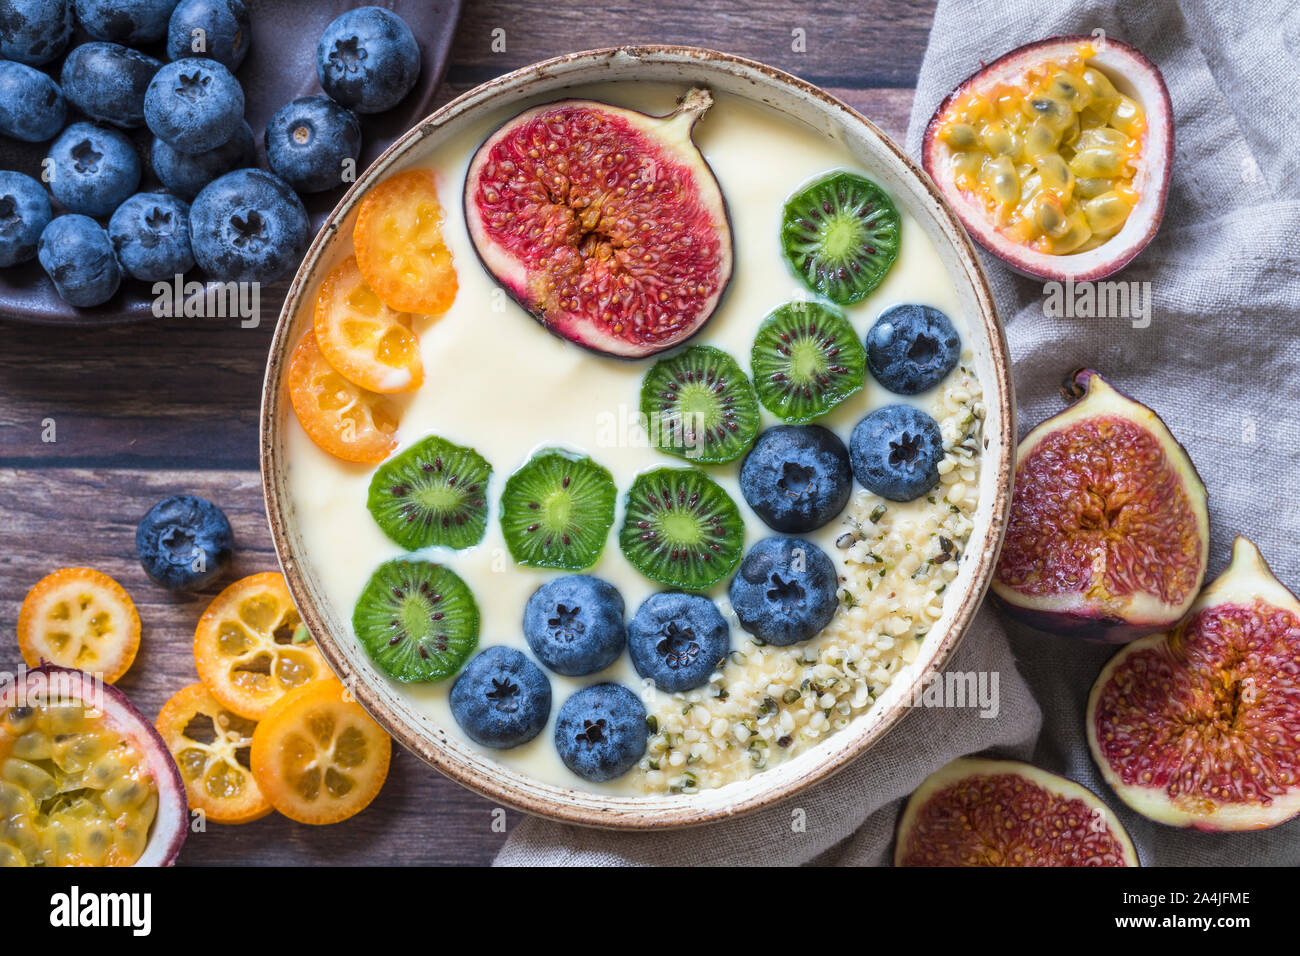 A fresh organic yogurt smoothie bowl seen from above with a variation of fresh fruits - blueberries, mini kiwis, figs, passion fruit and kumquat. Some Stock Photo